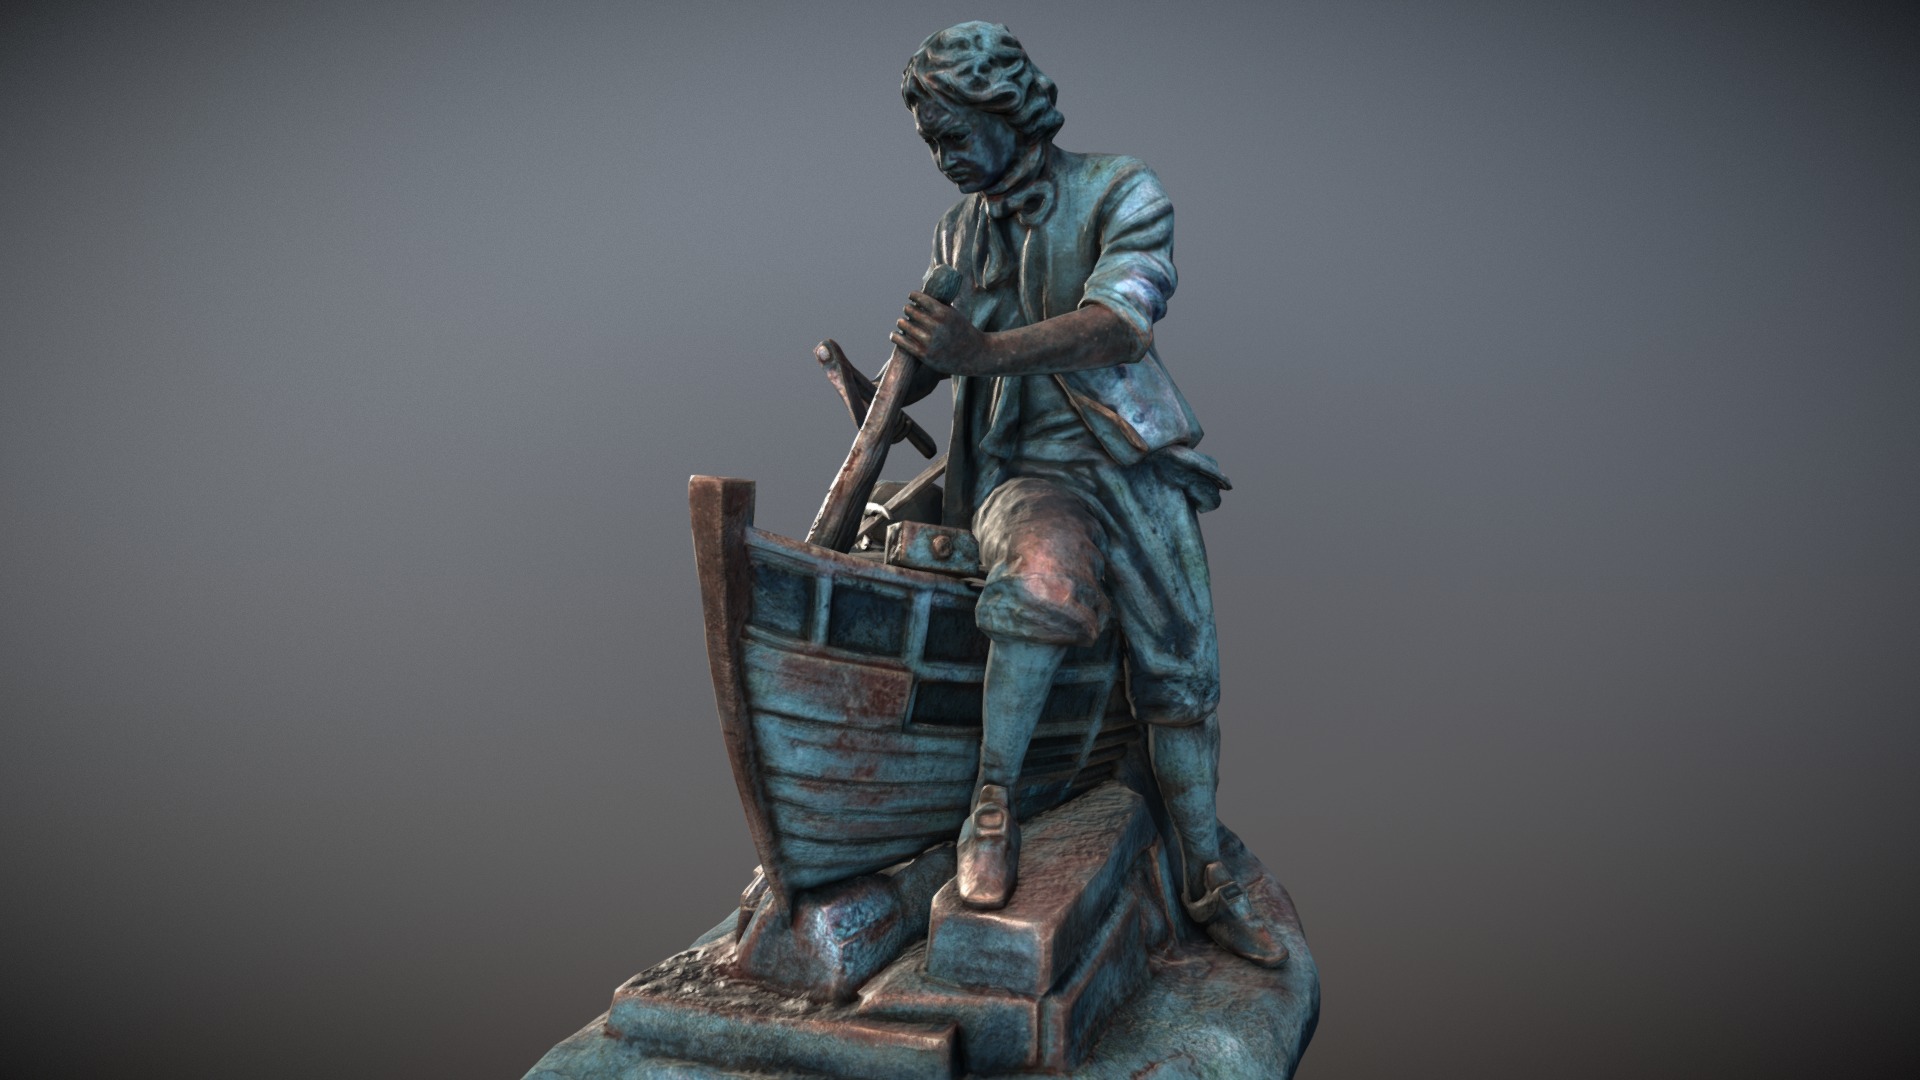 3D model Carpenter - This is a 3D model of the Carpenter. The 3D model is about a statue of a person holding a hammer.